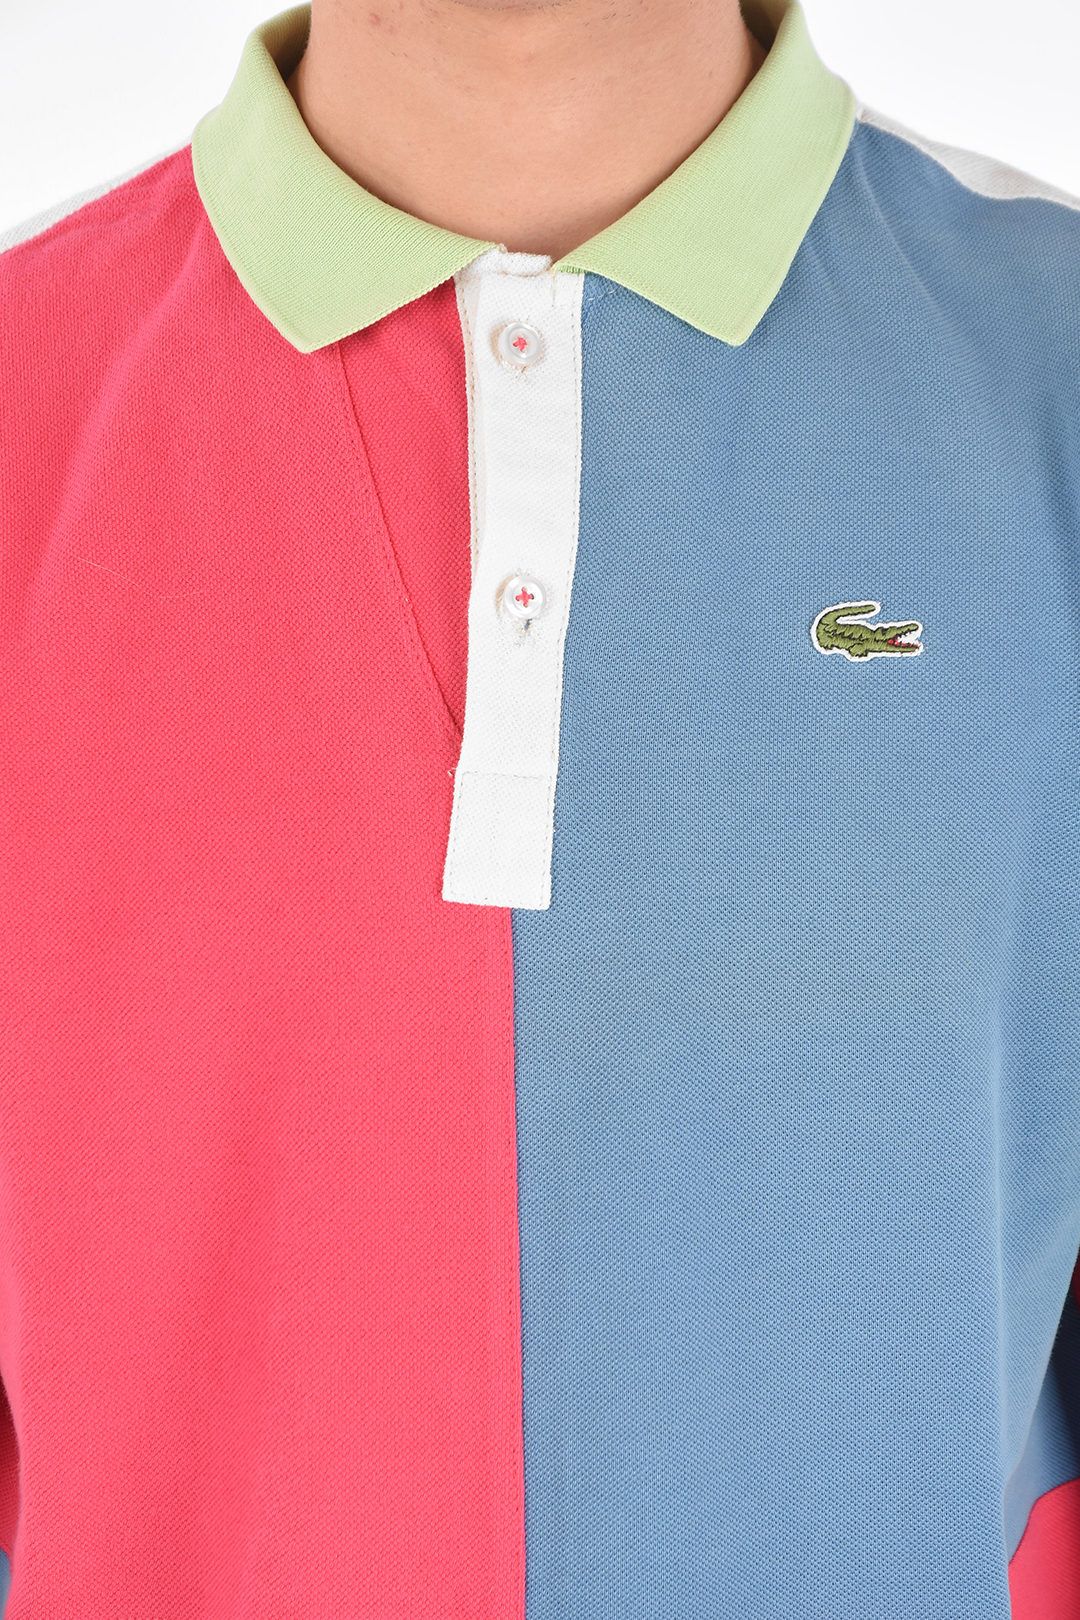 lacoste polo shirts south africa